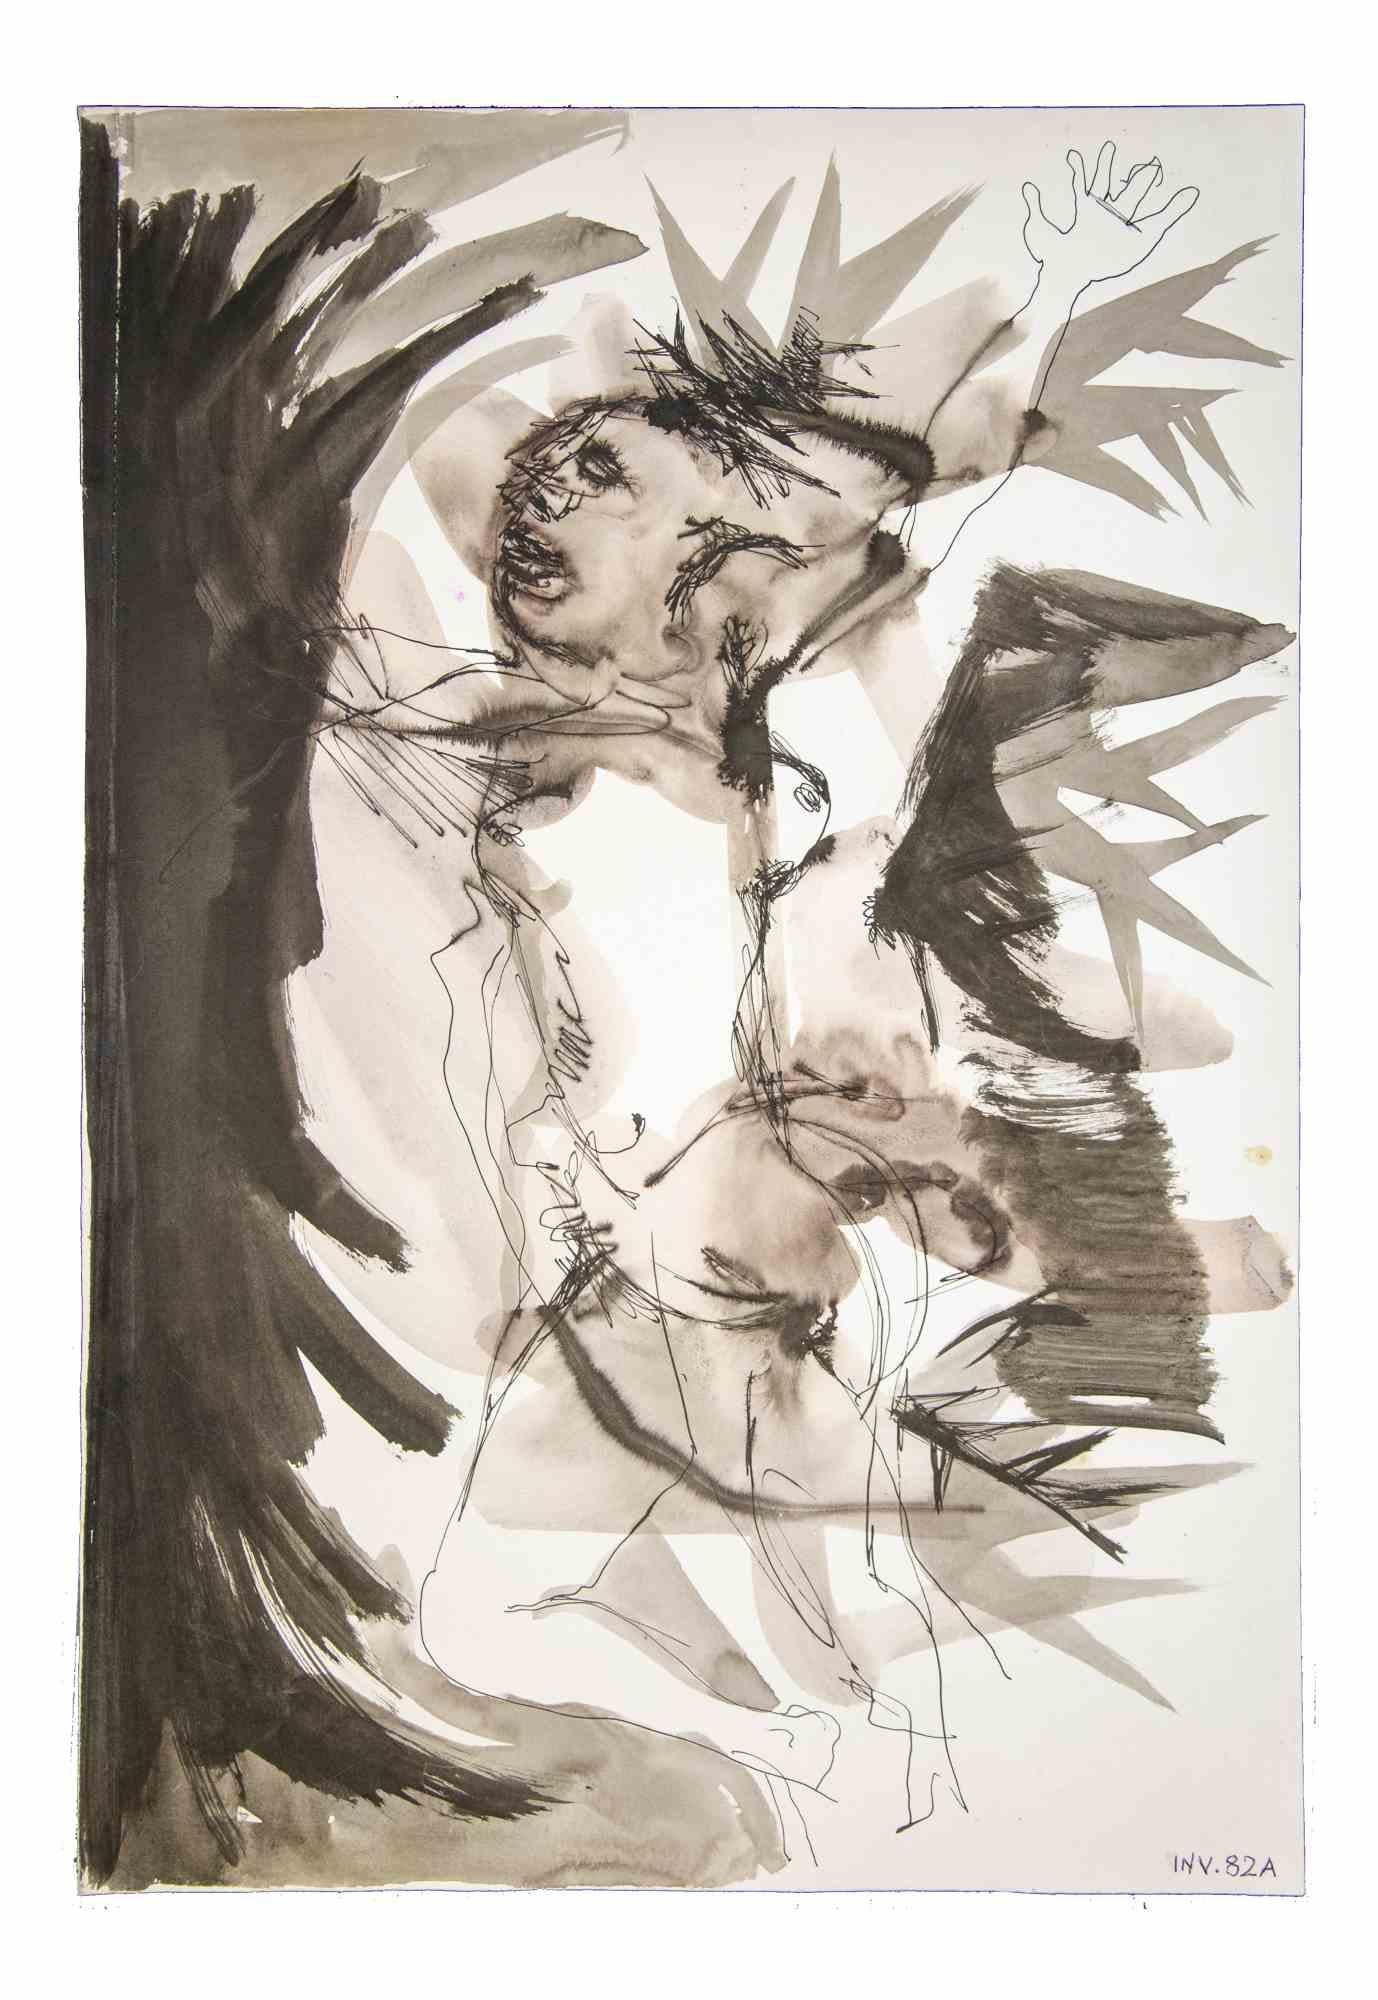 Figure is an original artwork realized in the 1970s by the Italian Contemporary artist  Leo Guida  (1992 - 2017).

Original drawings in China Ink and Watercolor on paper.

Good conditions but aged.

The artwork is depicted through strong strokes in